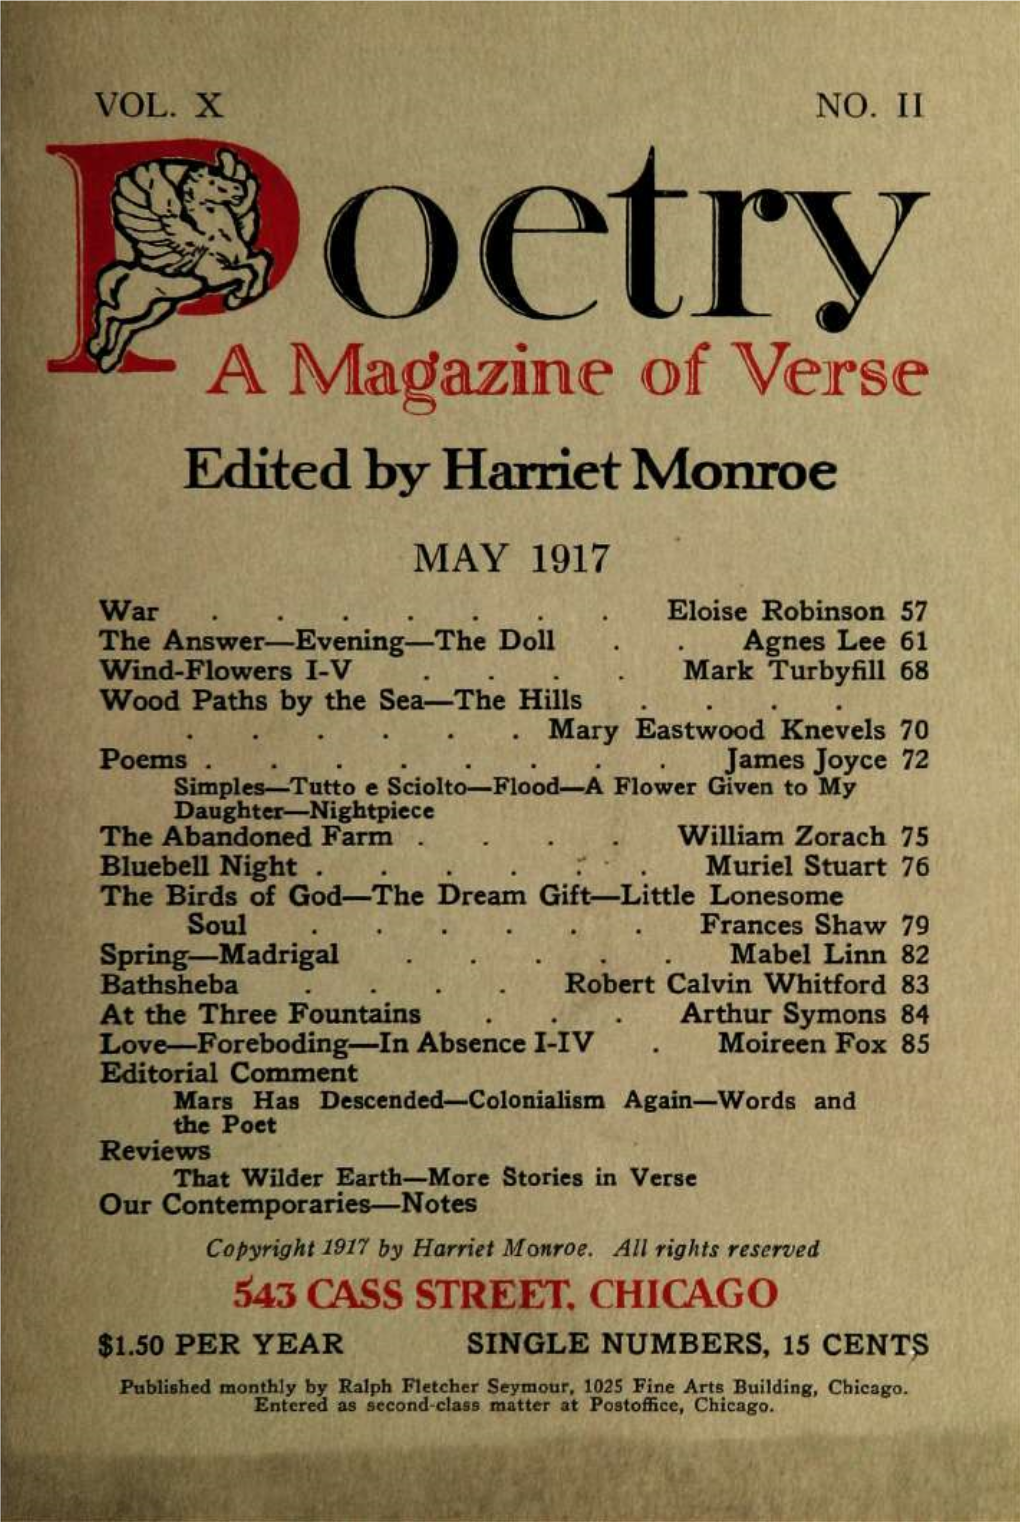 Edited by Harriet Monroe MAY 1917 War Eloise Robinson 57 the Answer—Evening—The Doll Agnes Lee 61 Wind-Flowers I-V